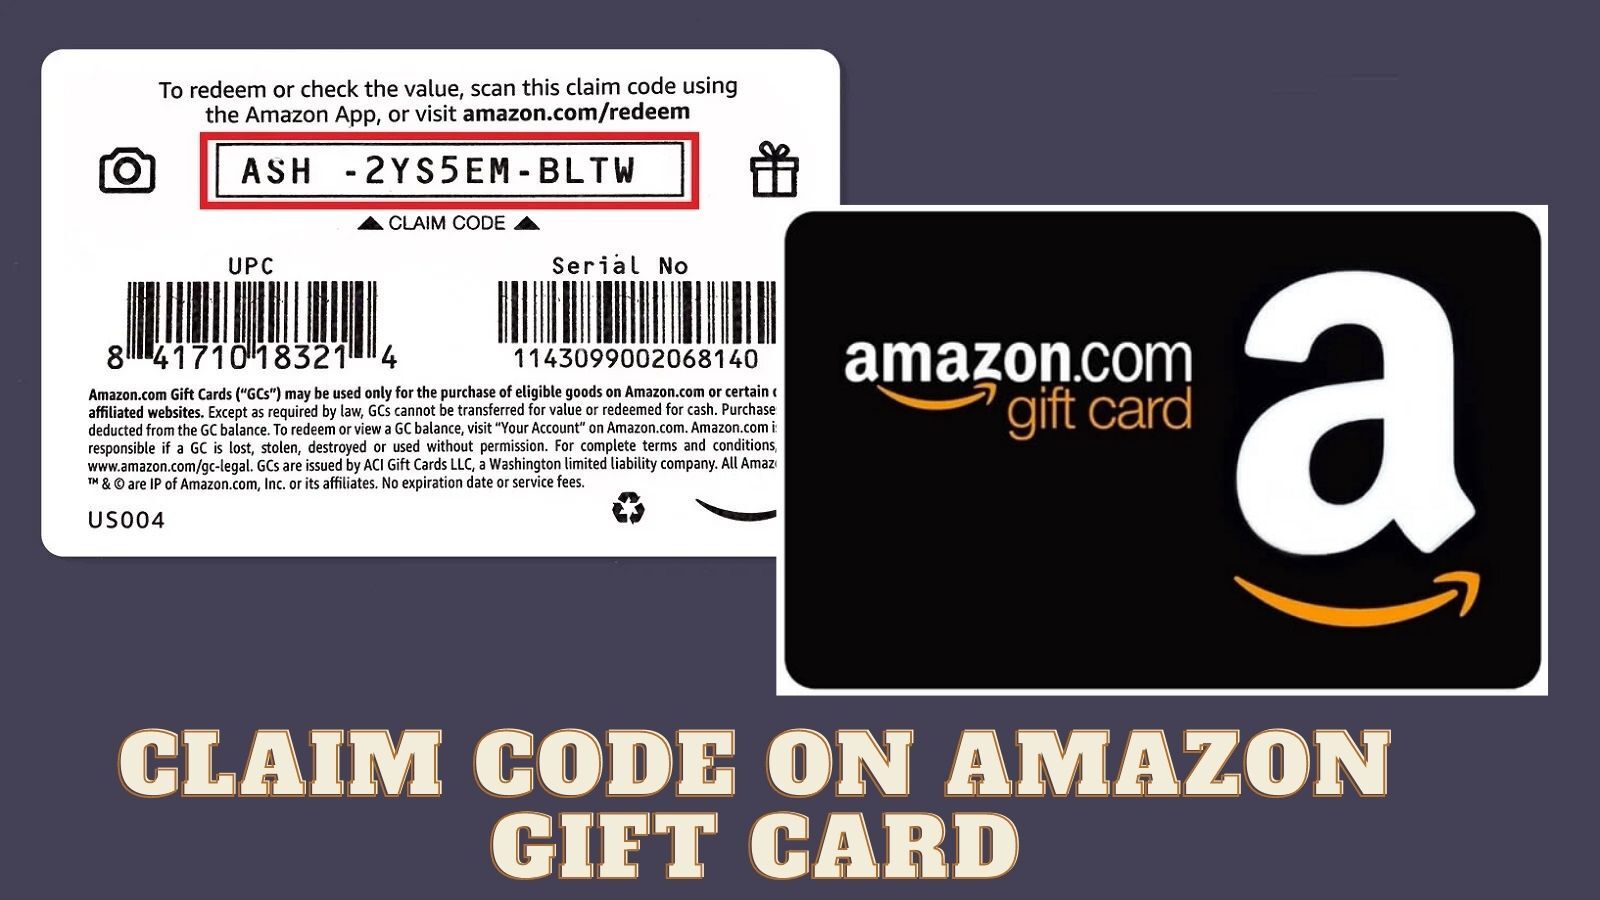 where-is-the-claim-code-on-an-amazon-gift-card-answered-cherry-picks